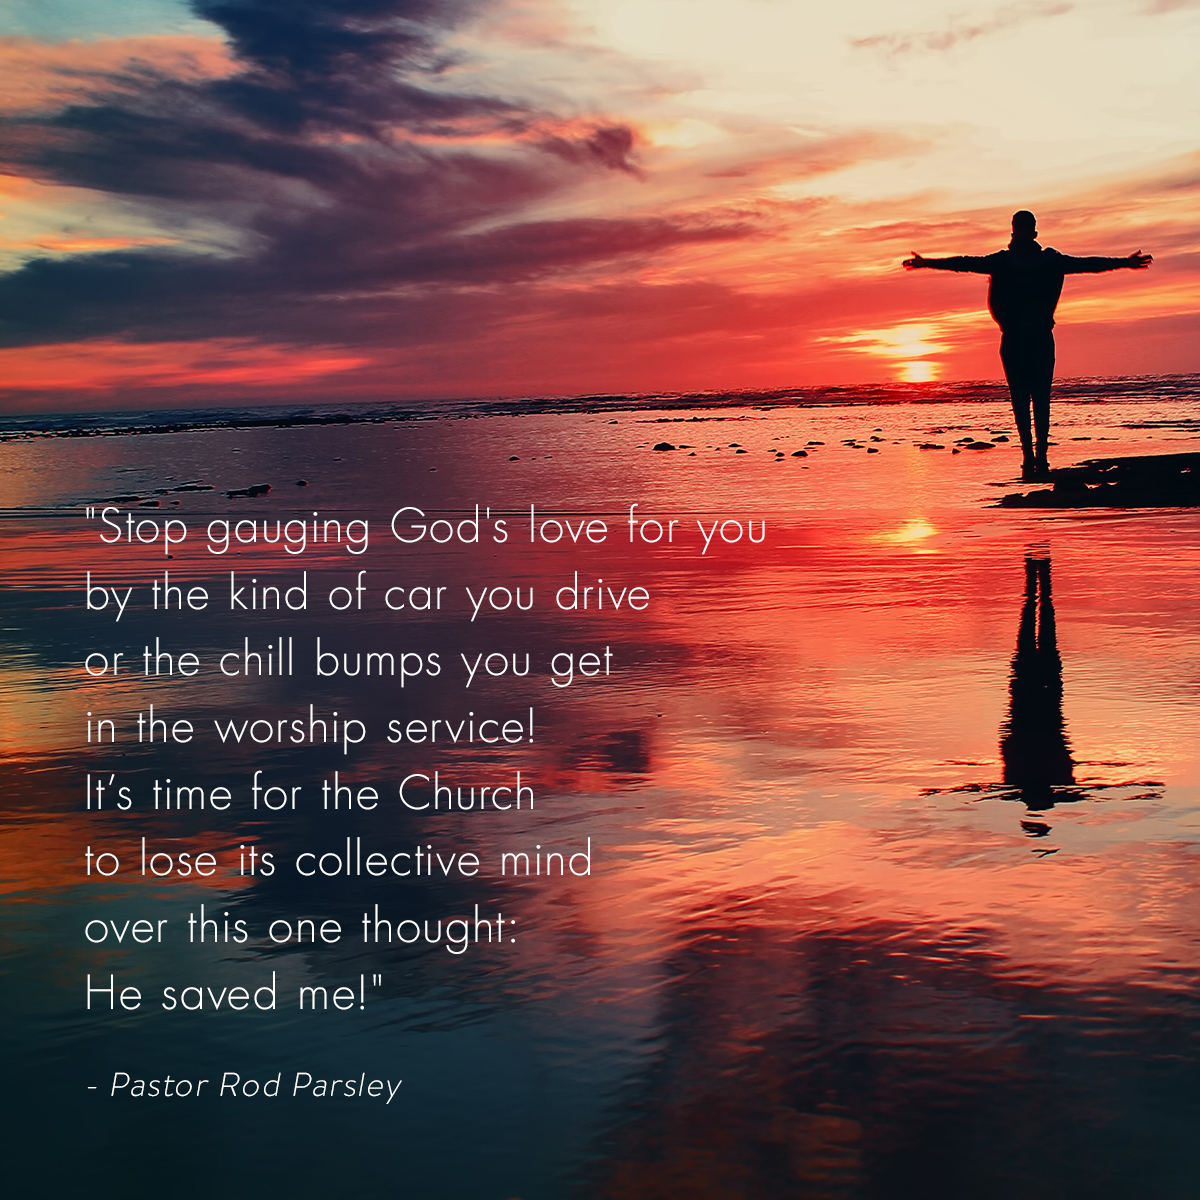 “Stop gauging God's love for you by the kind of car you drive or the chill bumps you get in the worship service! It’s time for the Church to lose its collective mind over this one thought: He saved me!” – Pastor Rod Parsley